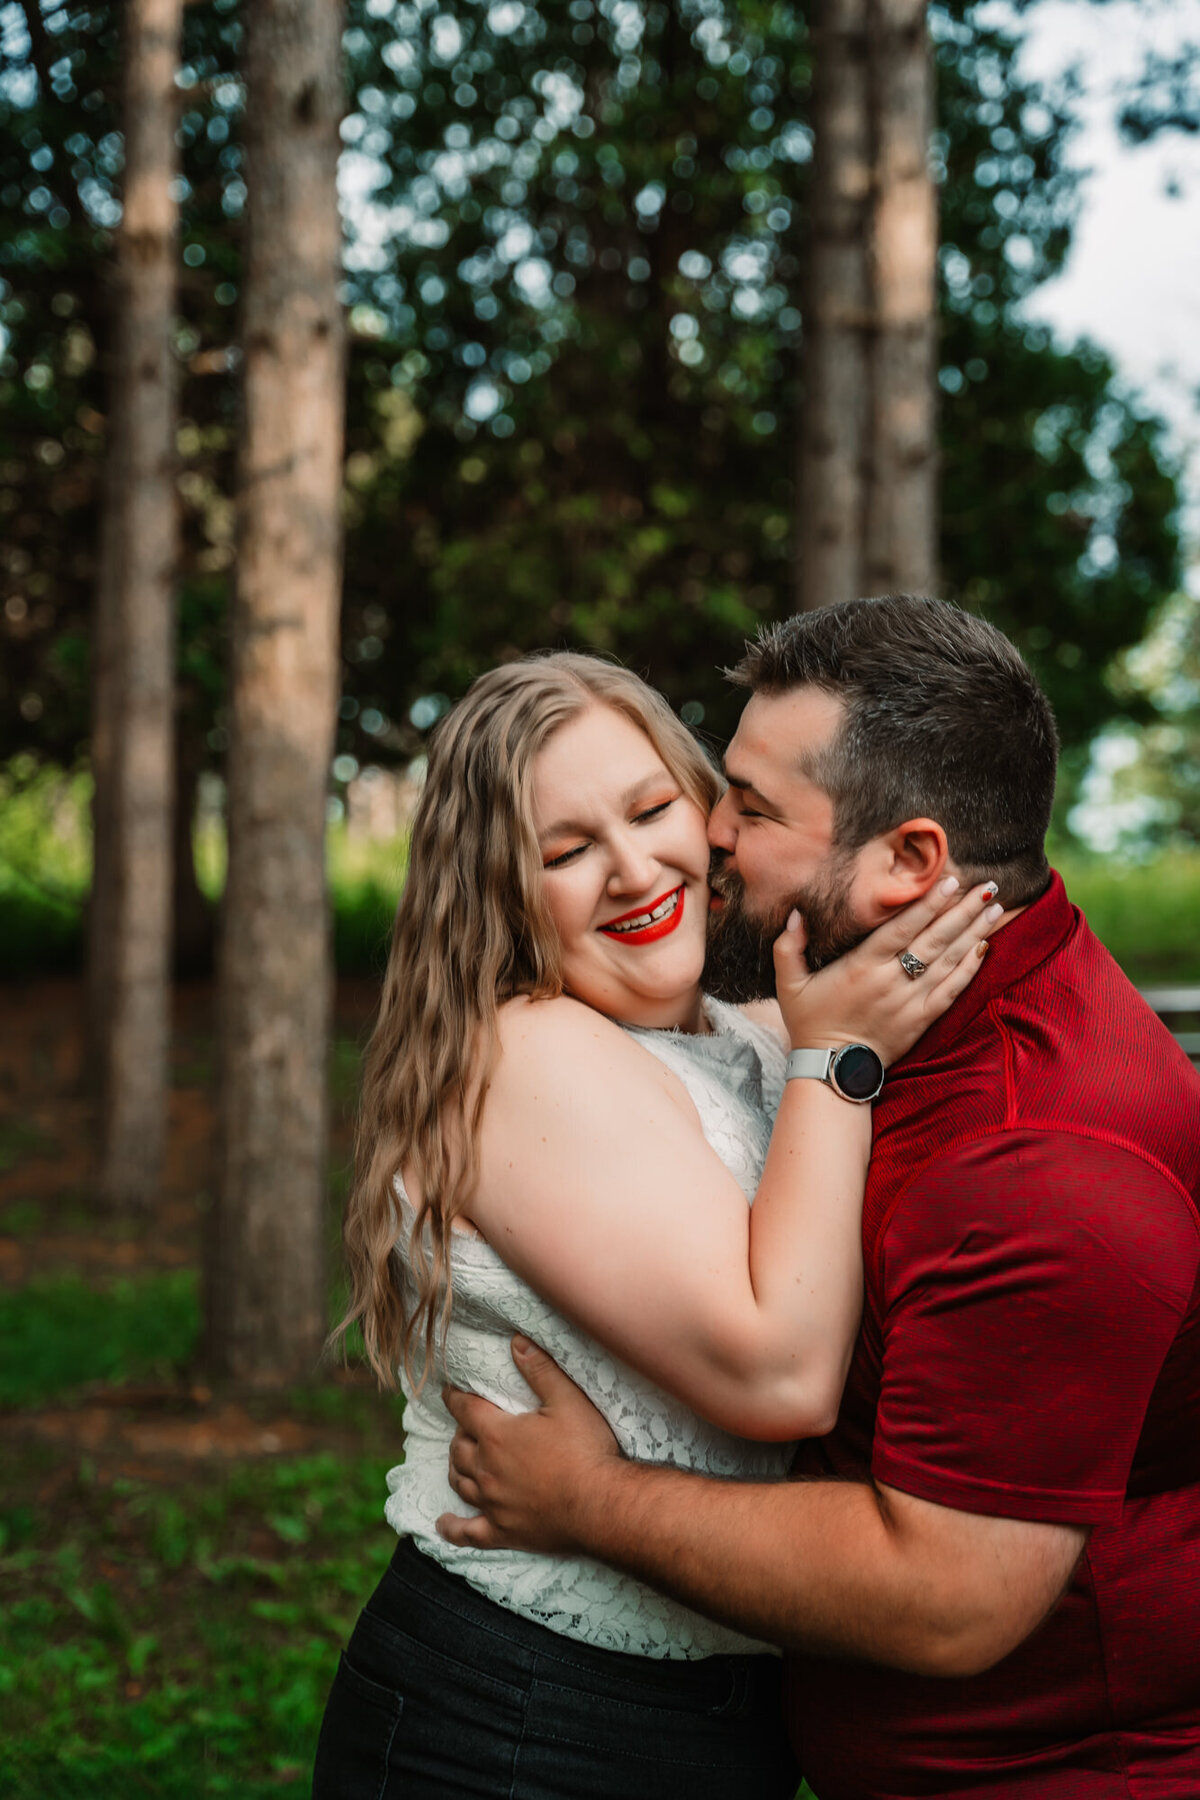 man kisses woman on cheek while she smiles in a forest